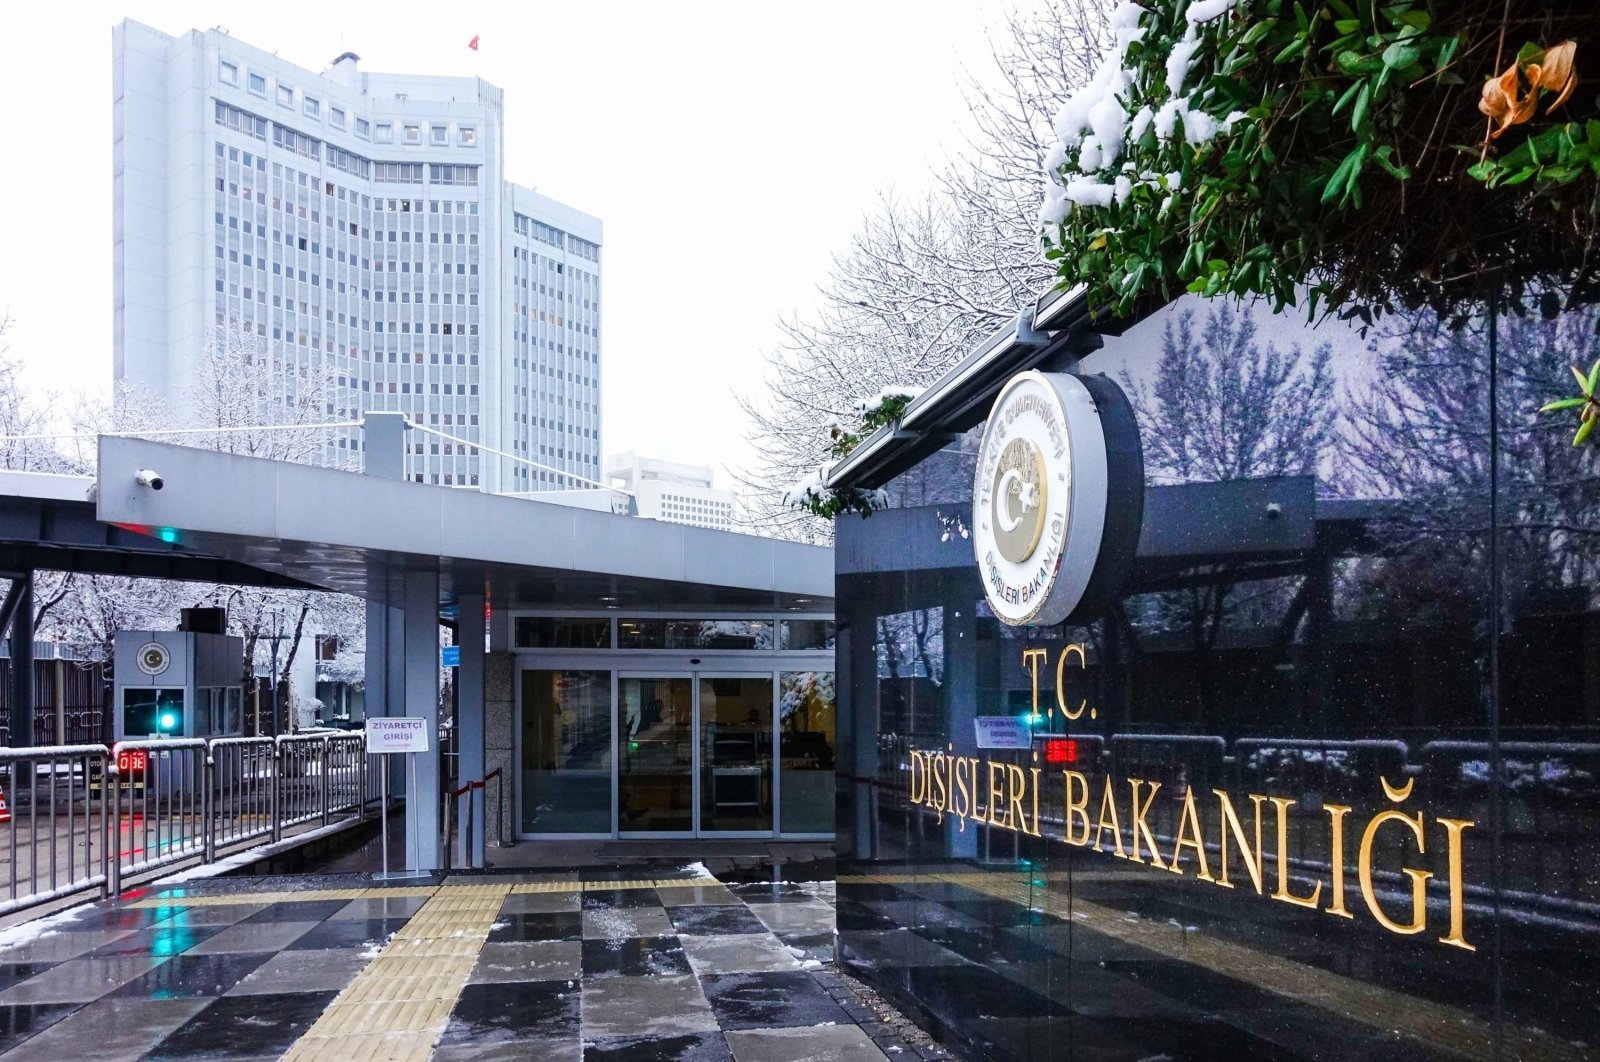 The ministry of Foreign Affairs headquarters in Ankara, Türkiye, is seen in this undated file photo. (File Photo)